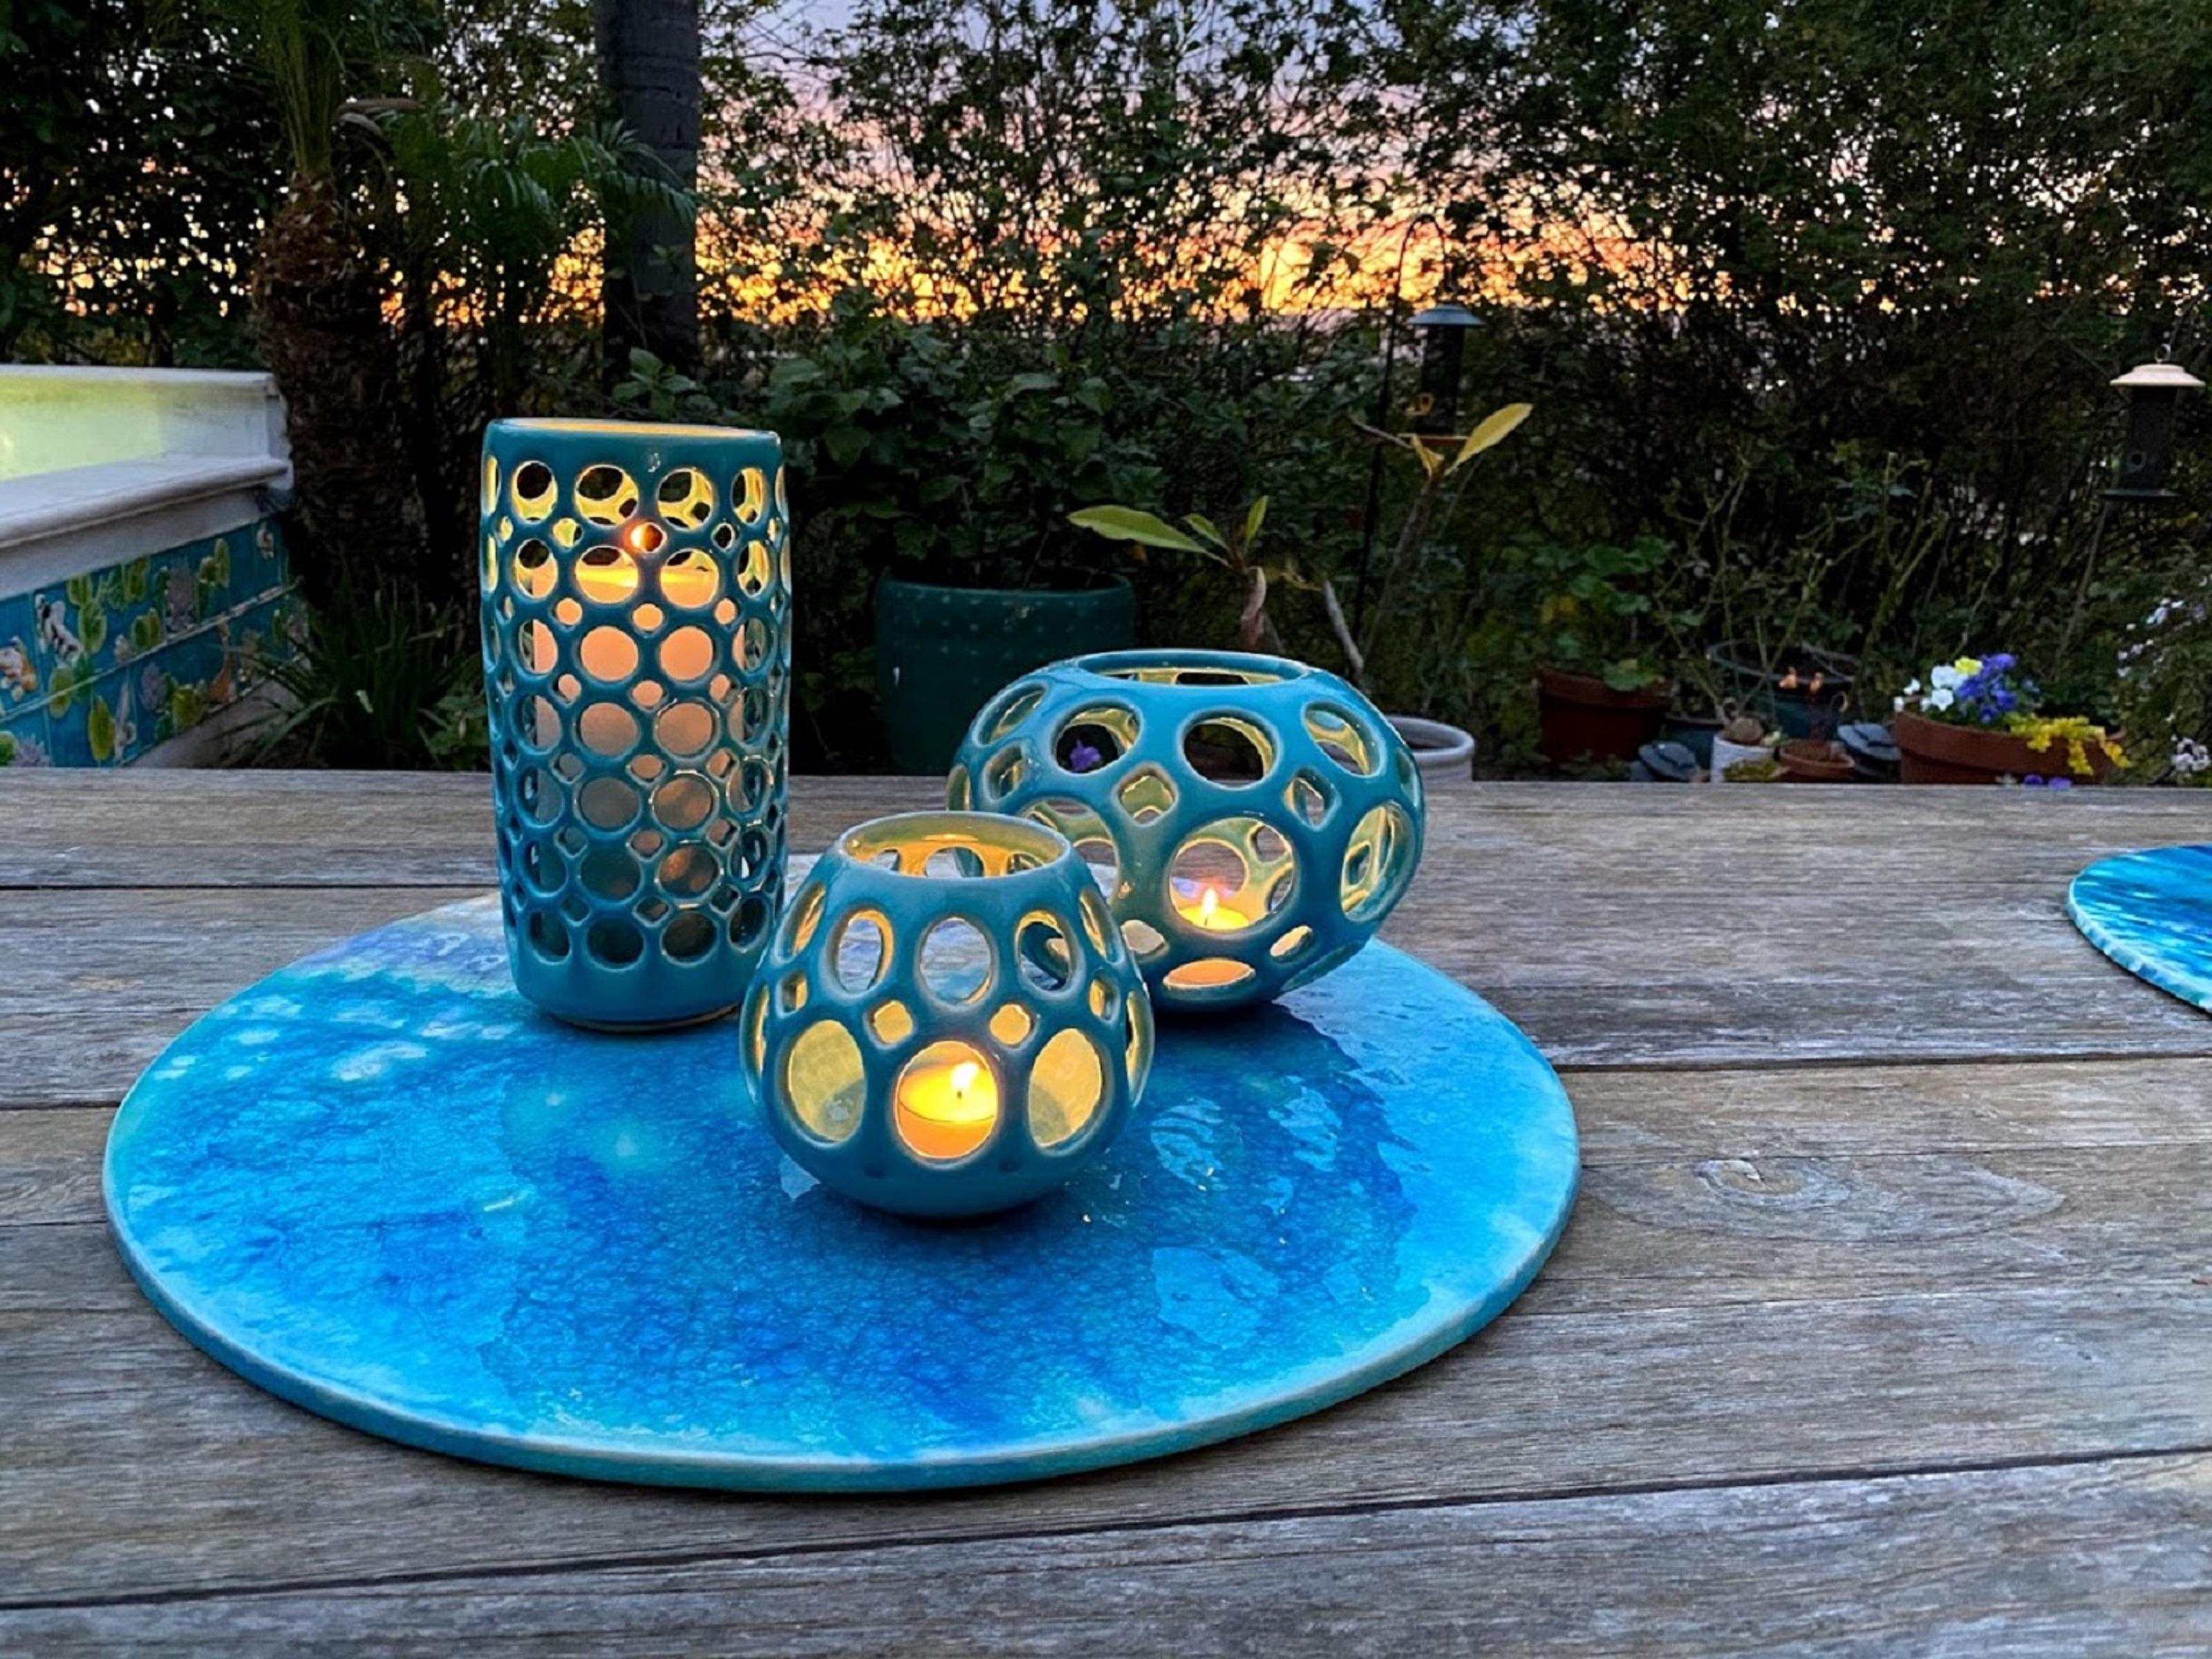 Inspired by Mid-Century Modern design, the pierced collection is wheel thrown and hand pierced stoneware with a turquoise crackle glaze. Small holes are created when the clay is still wet and then each hole is painstakingly enlarged and smoothed